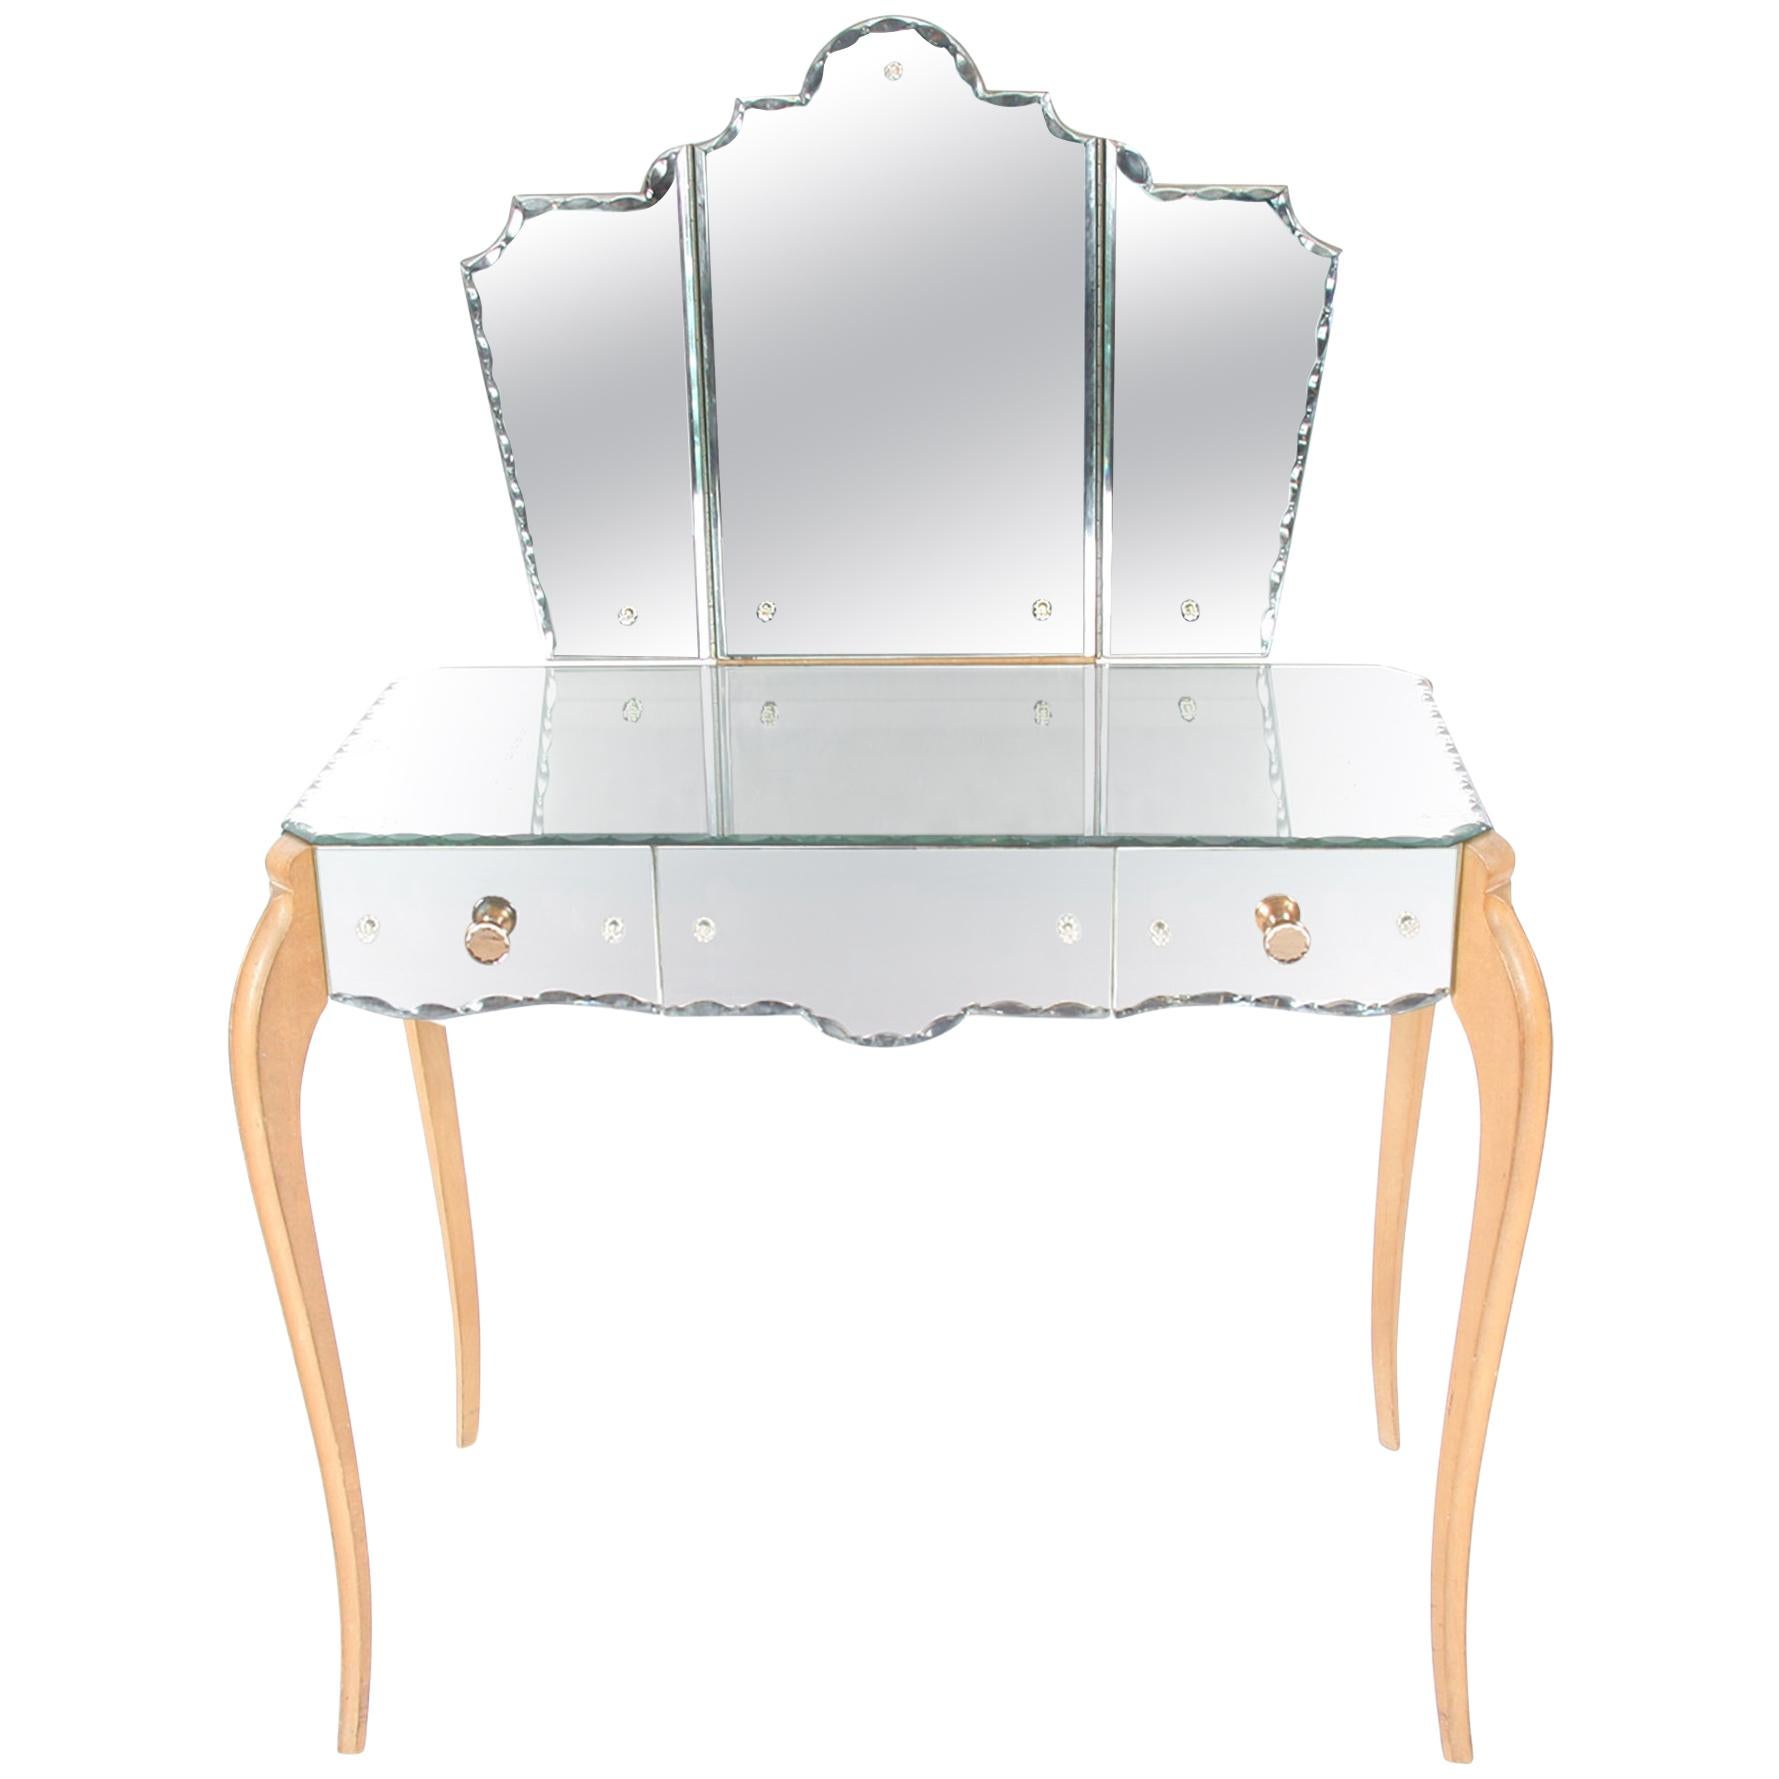 Mid-20th Century French Mirror Dressing Table